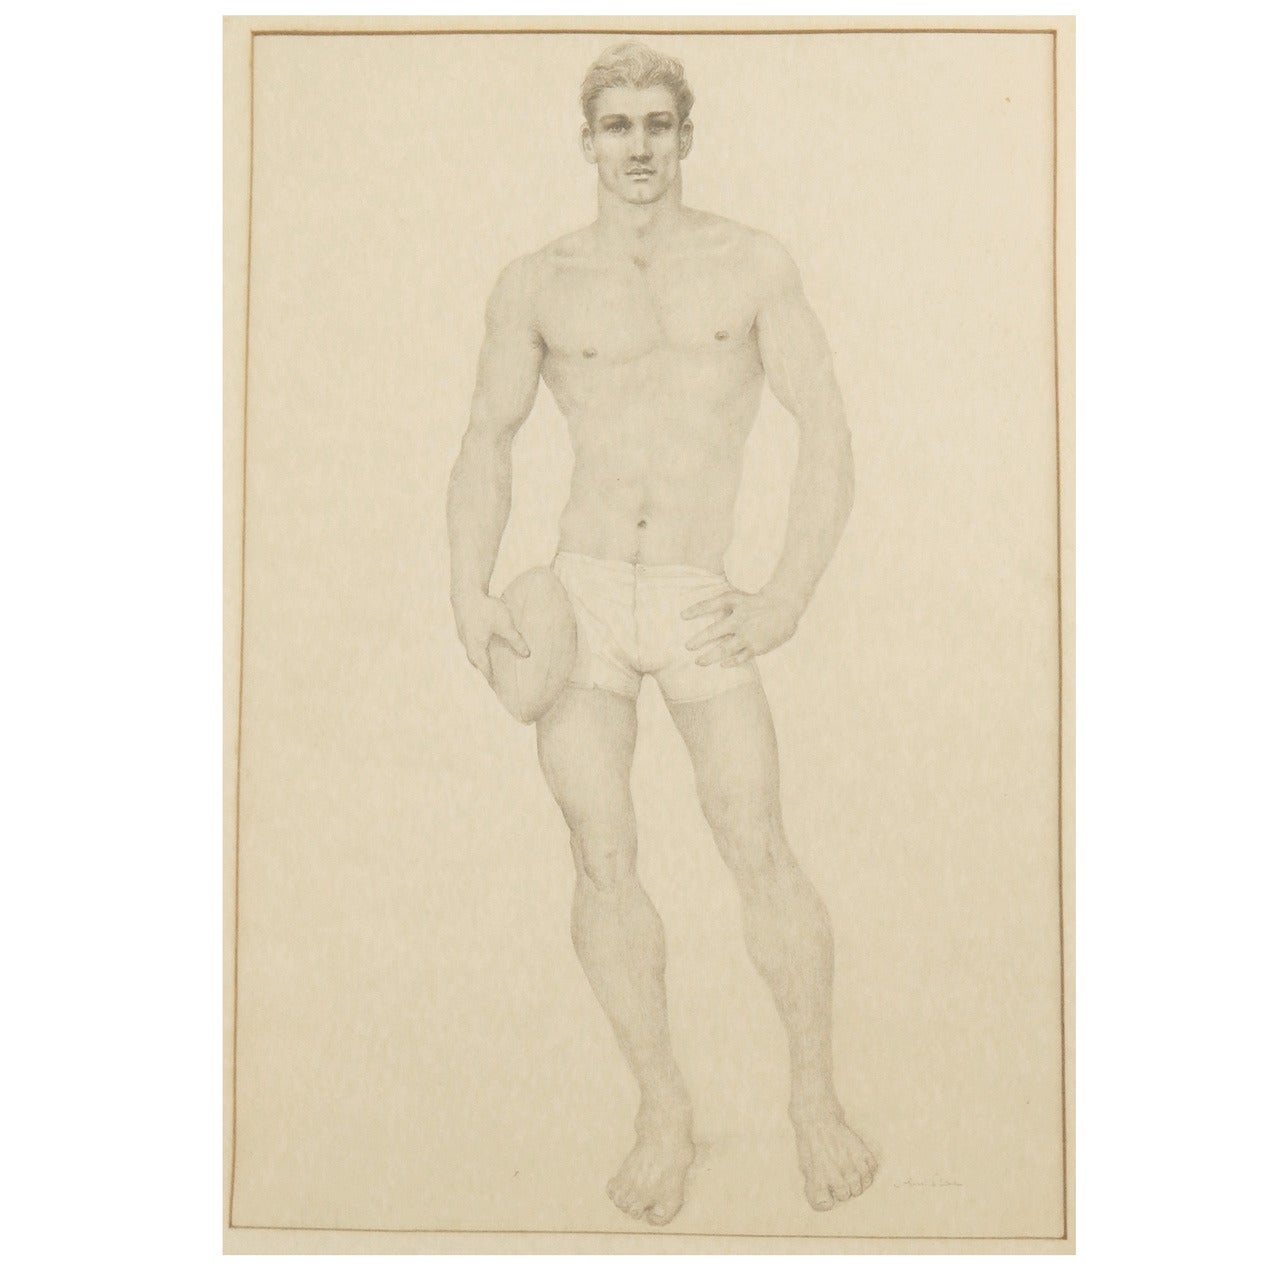 "Footballer, " Rare, Early Drawing of Semi-Nude Male with Football by Lear